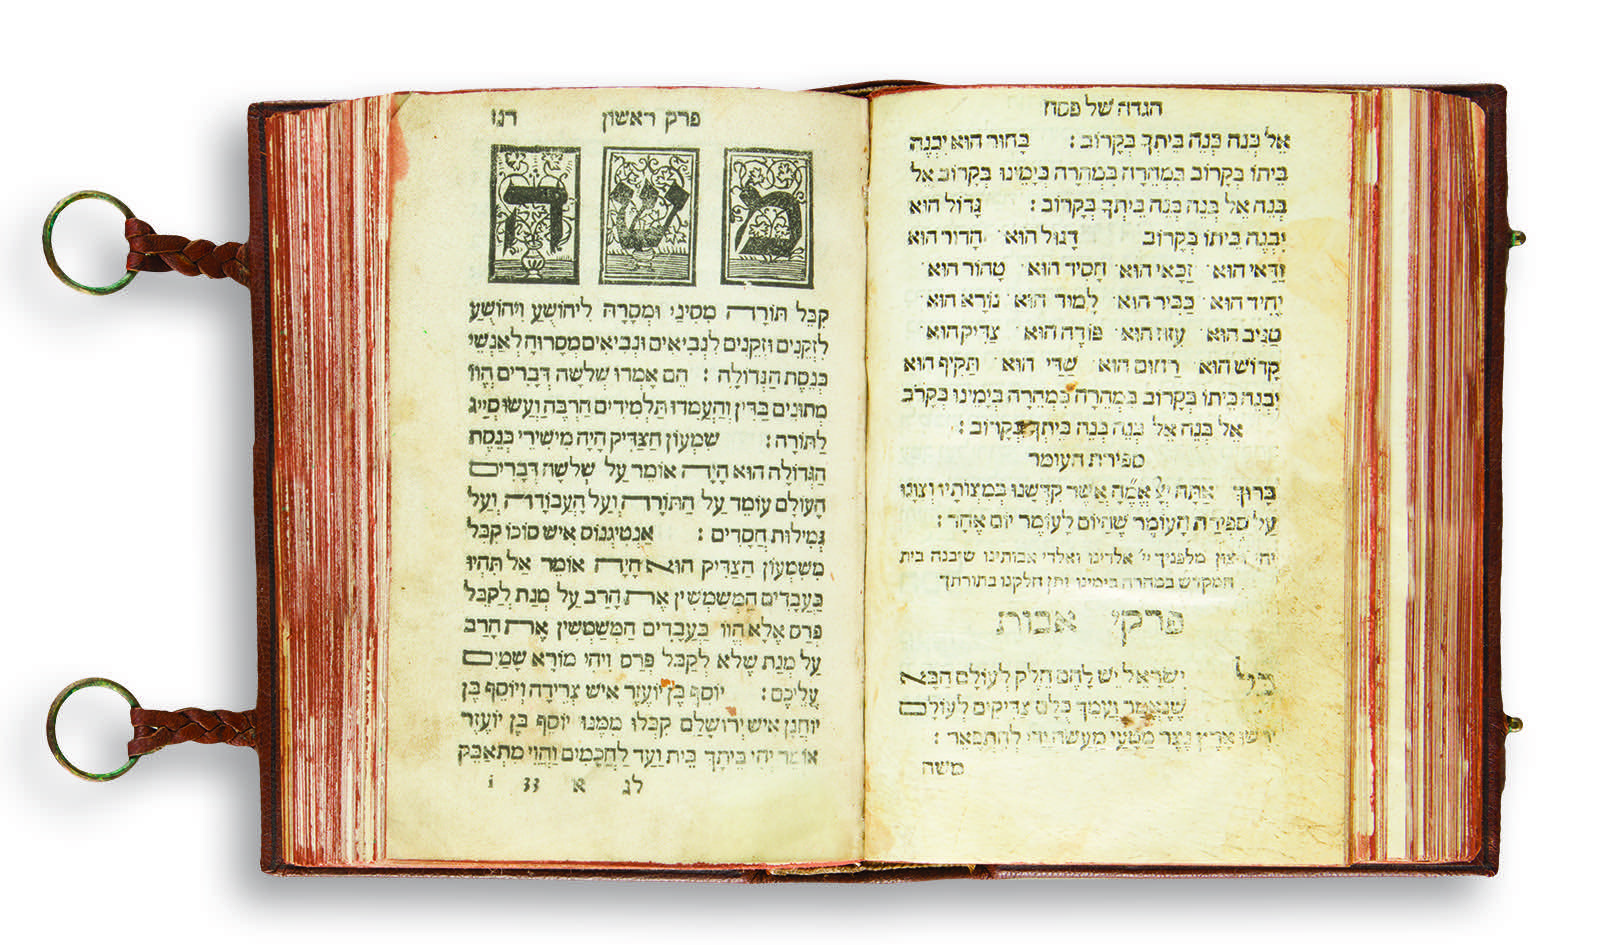 Seder Tephiloth mikol HaShanah. <p>Printed entirely on vellum. <p>The Valmadonna Copy. <p>Mantua, 1558. <p>Sold at auction 9th November, 2017. <p>Hammer-price: $80,000.